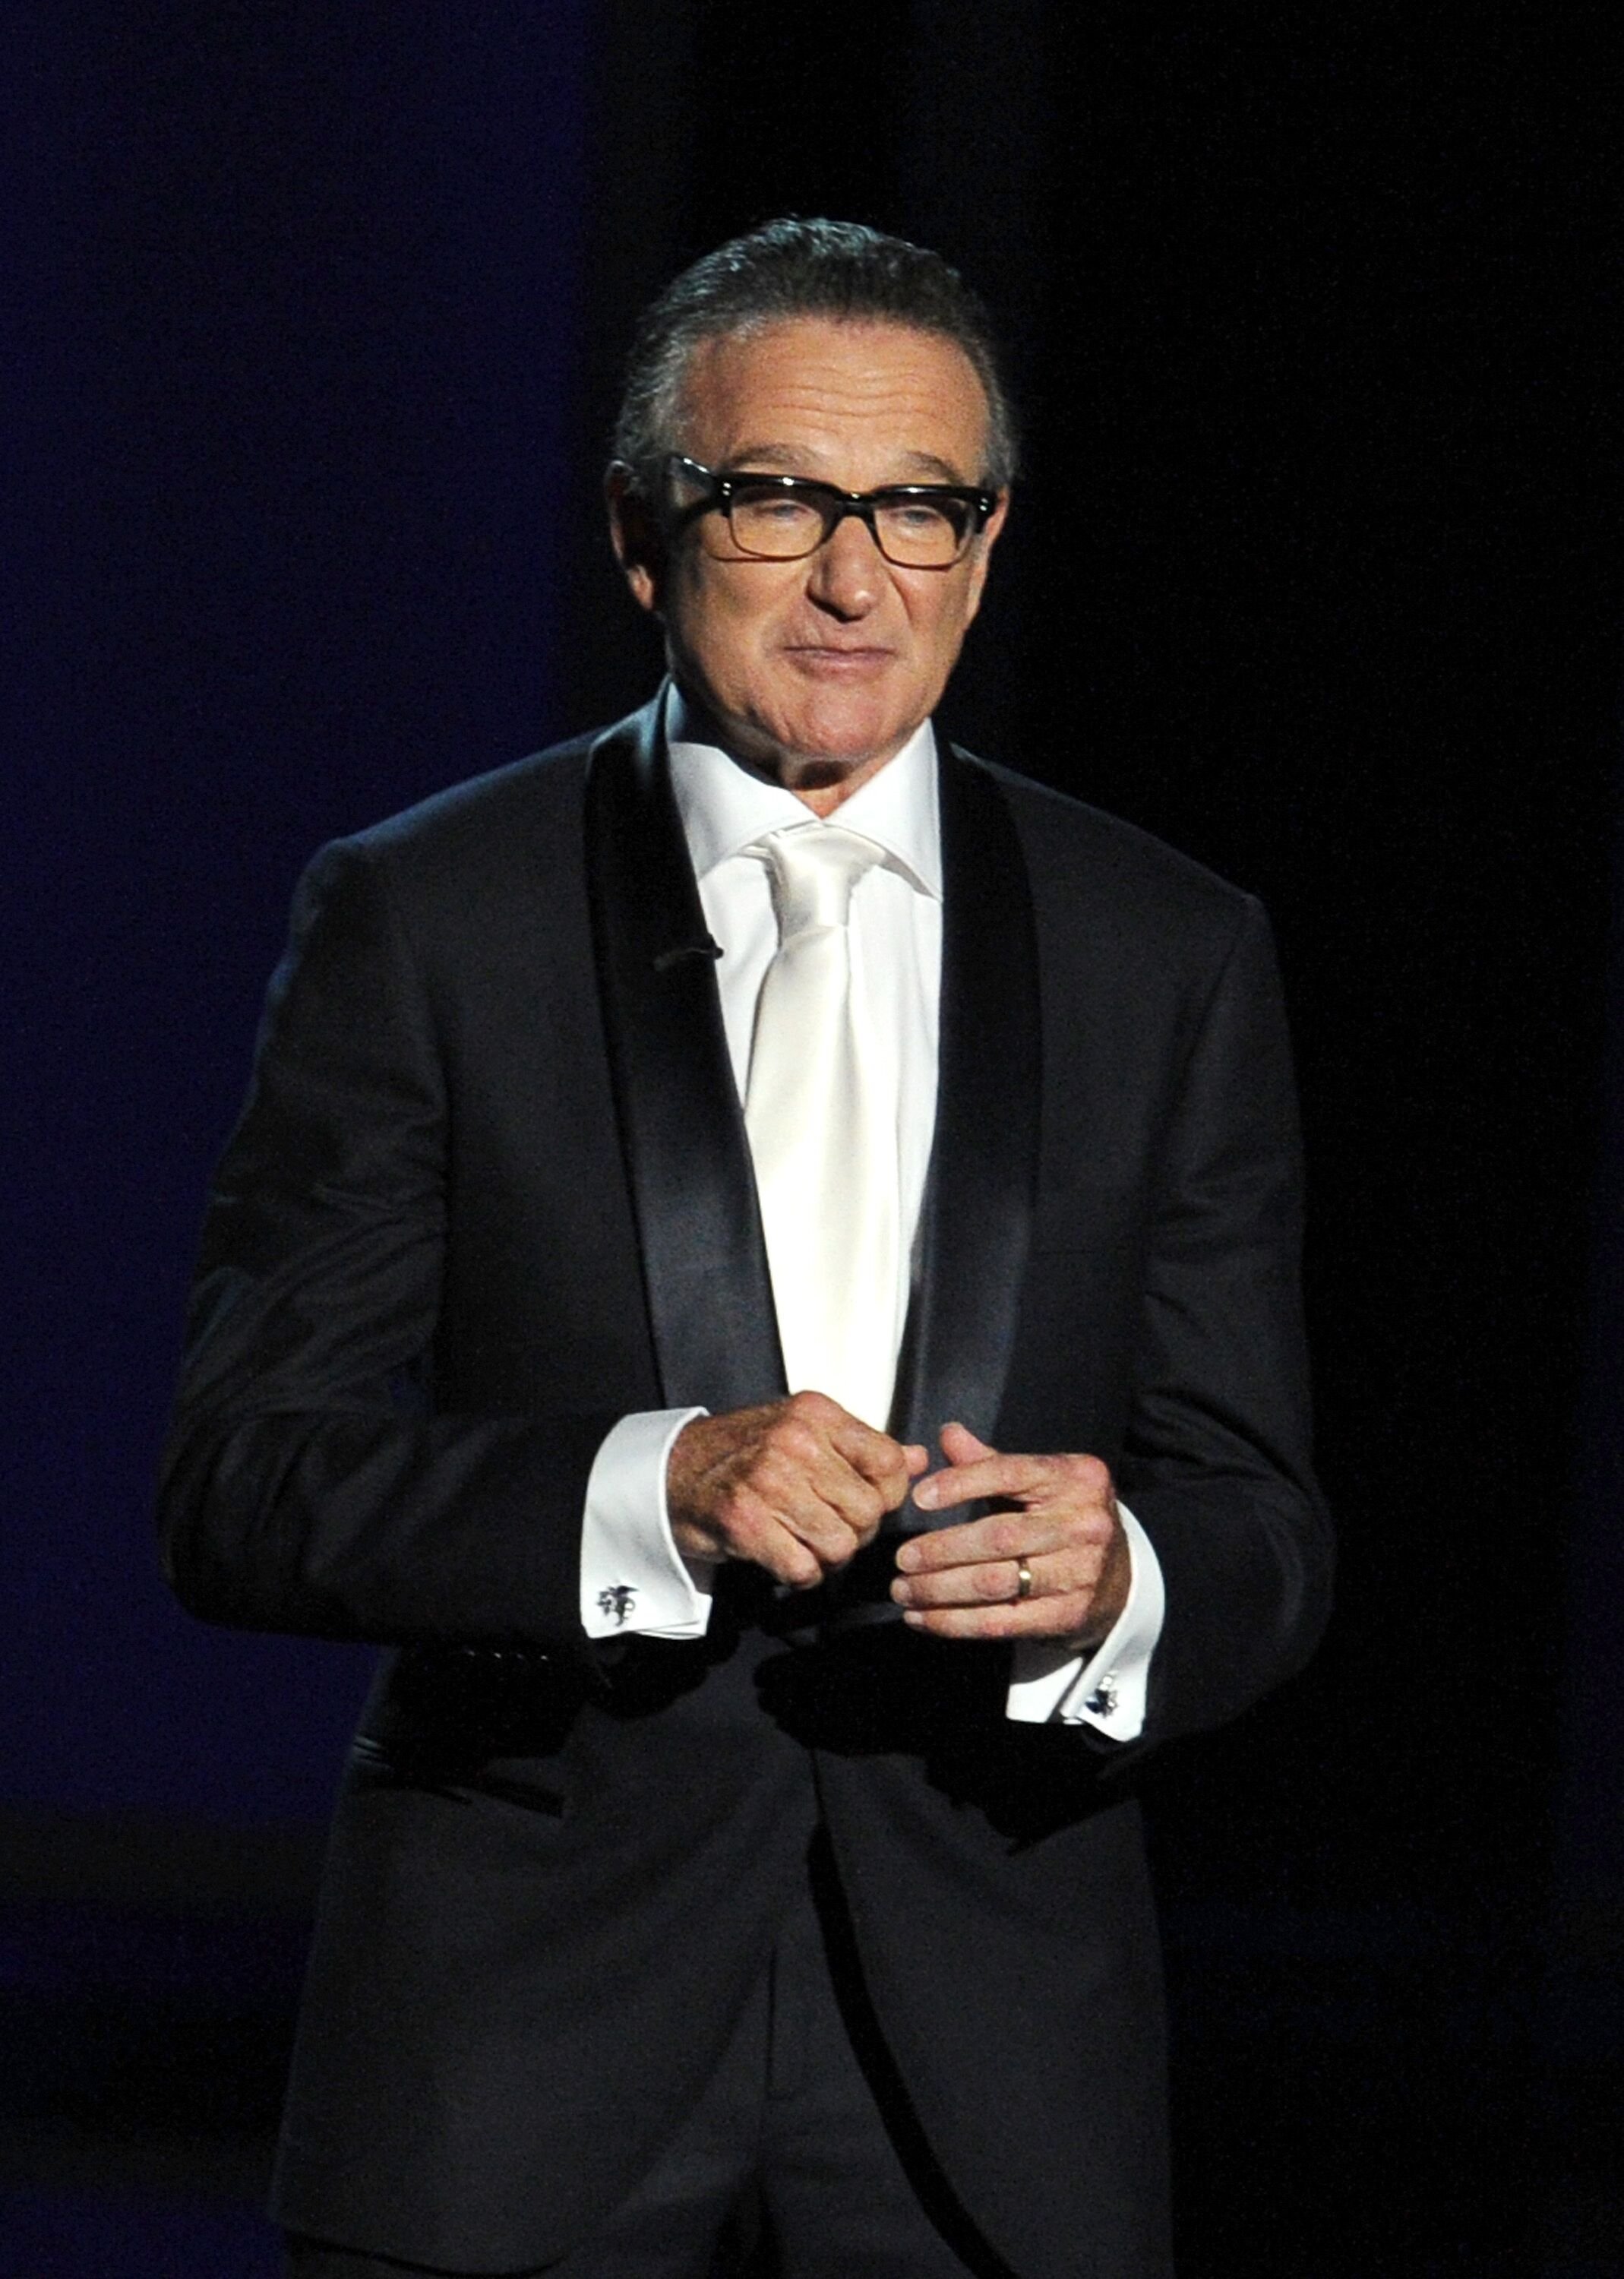 Robin Williams speaks onstage during the 65th Annual Primetime Emmy Awards. | Source: Getty Images